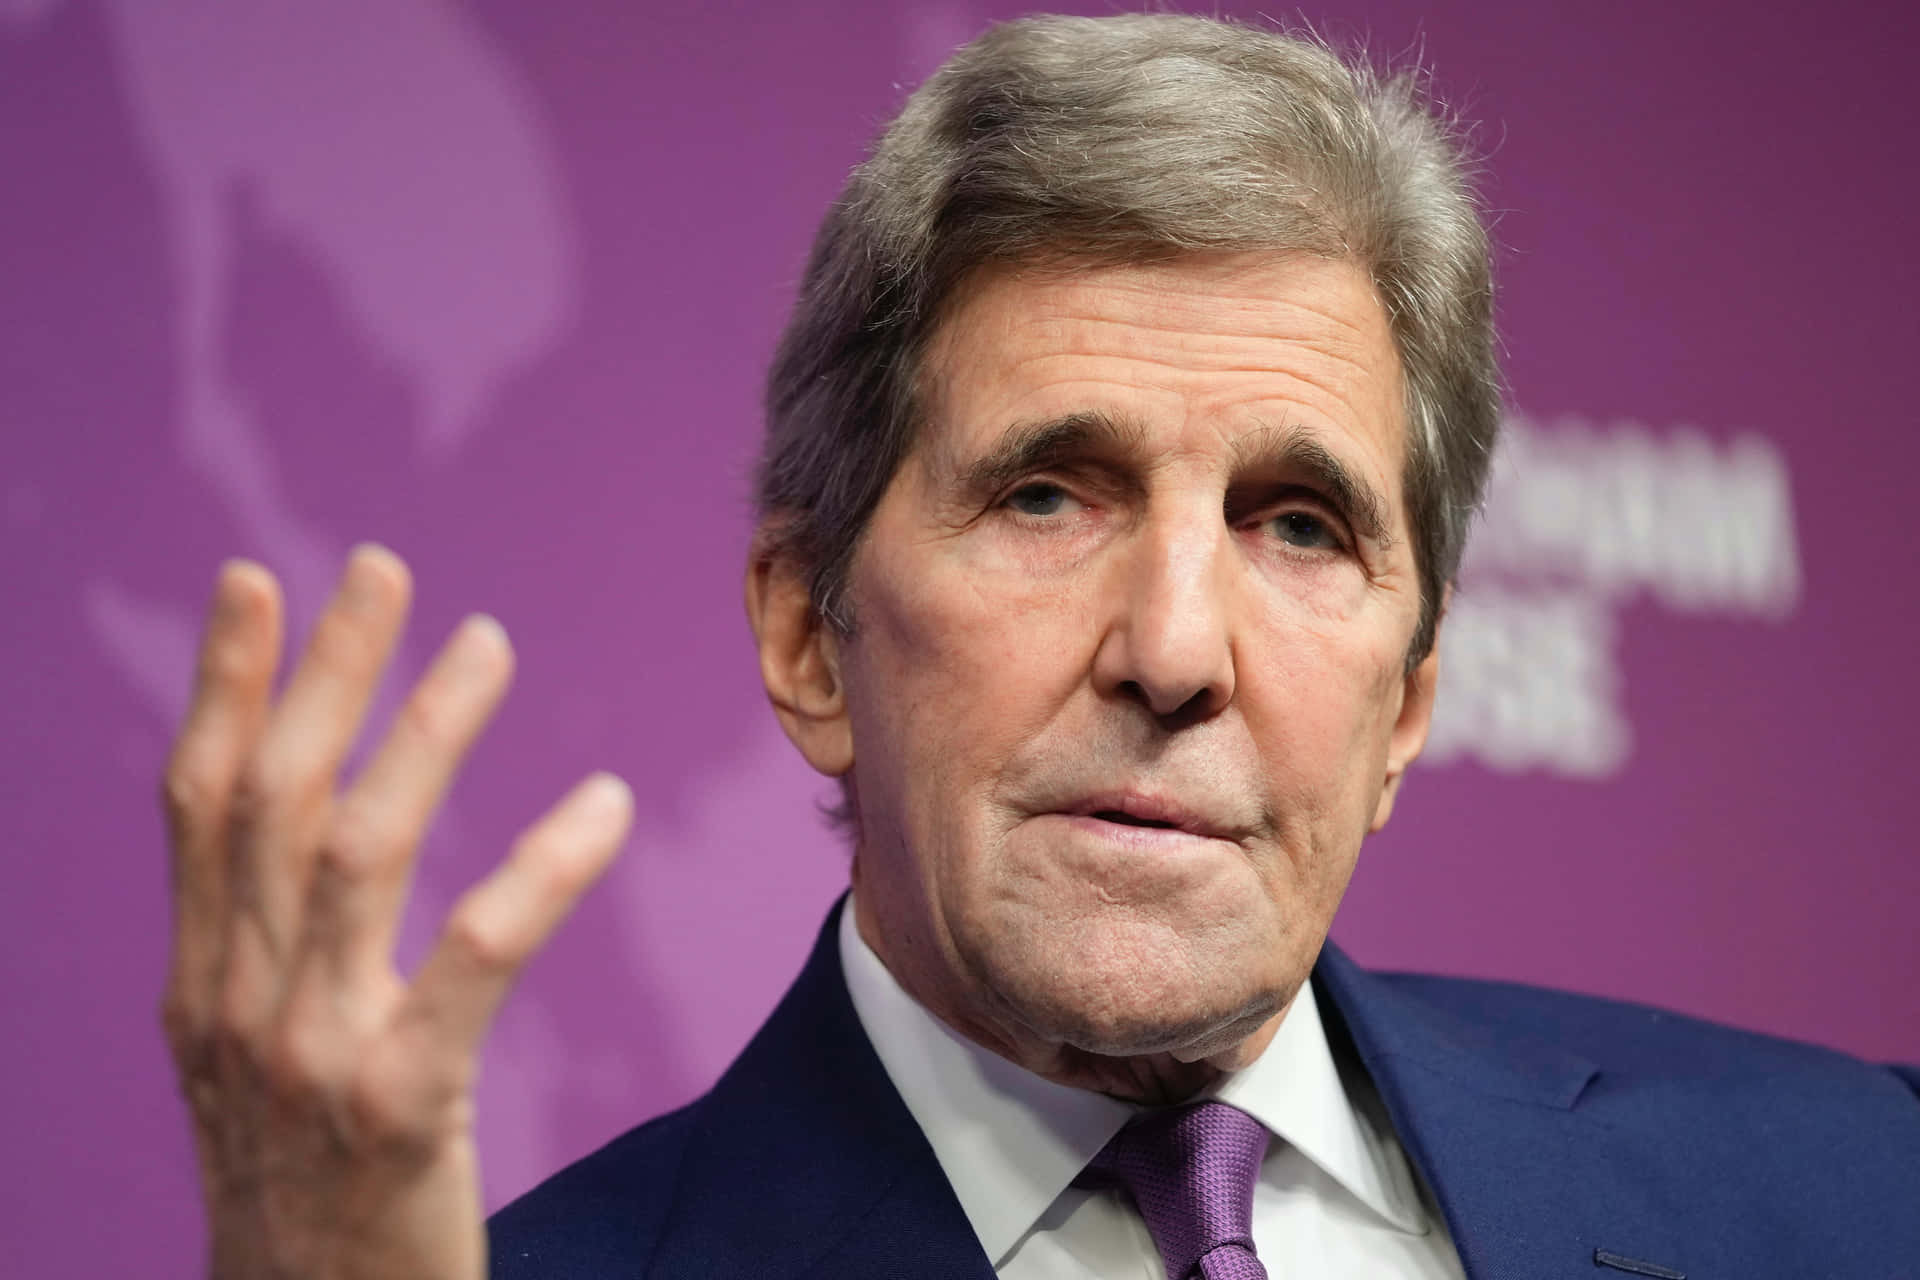 John Kerry With One Hand Up Wallpaper